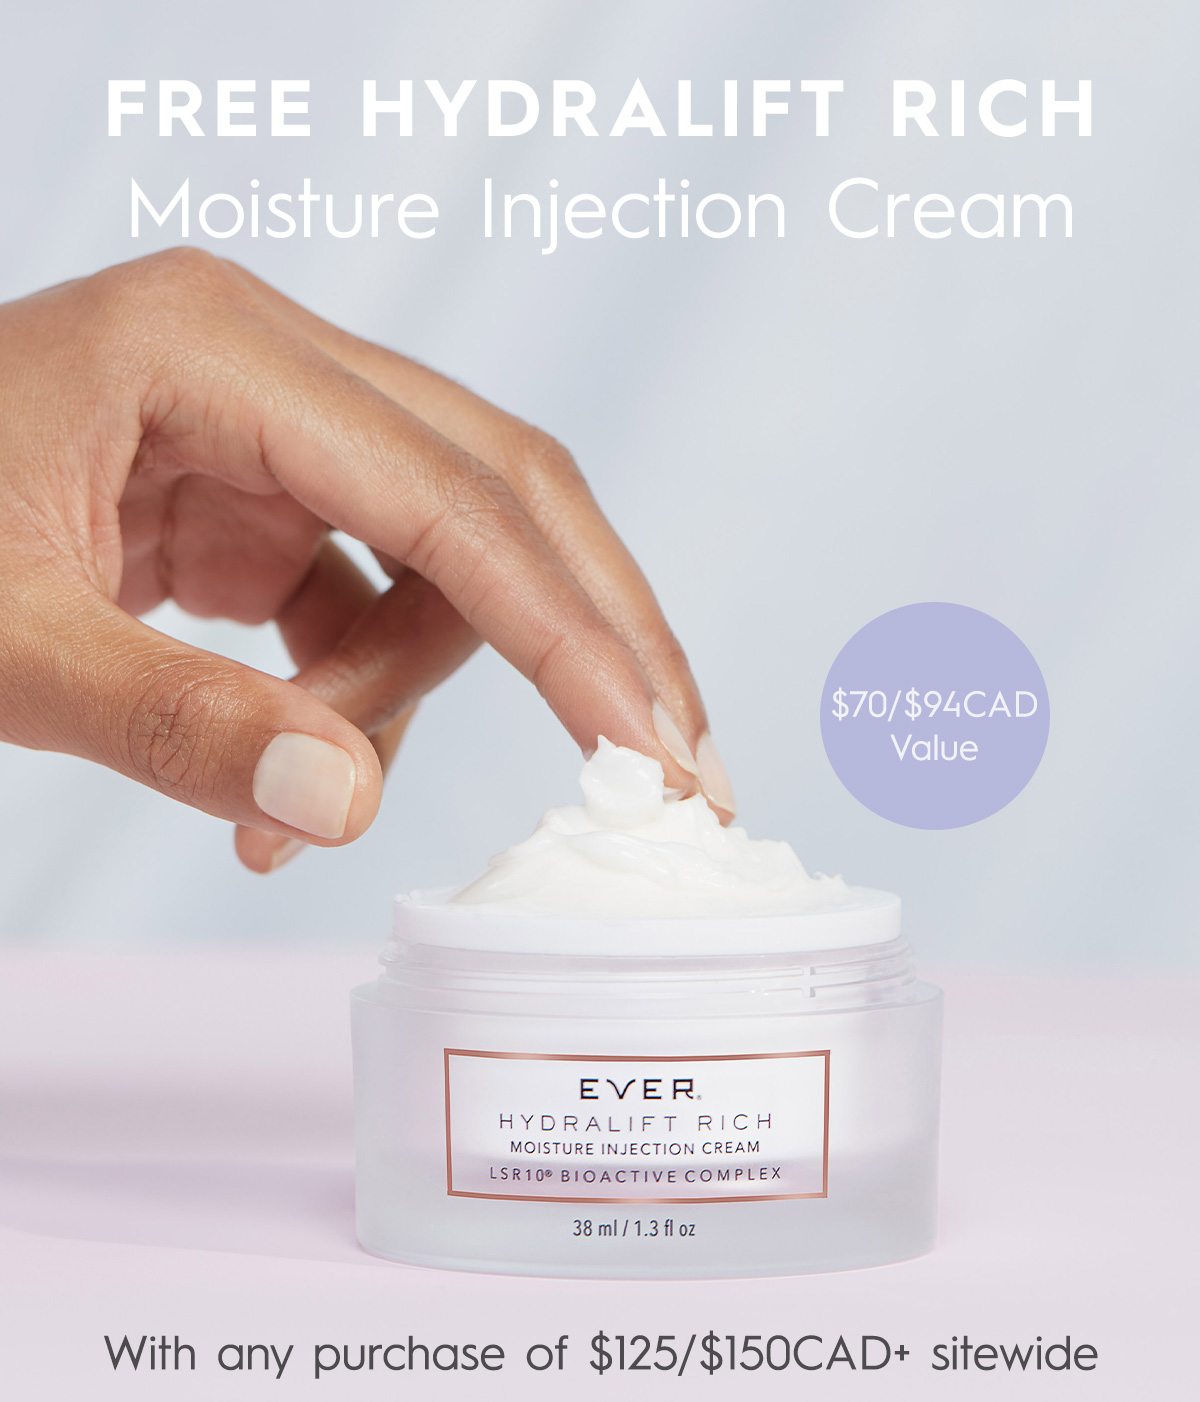 FREE HYDRALIFT RICH Moisture Injection Cream with purchase requirements